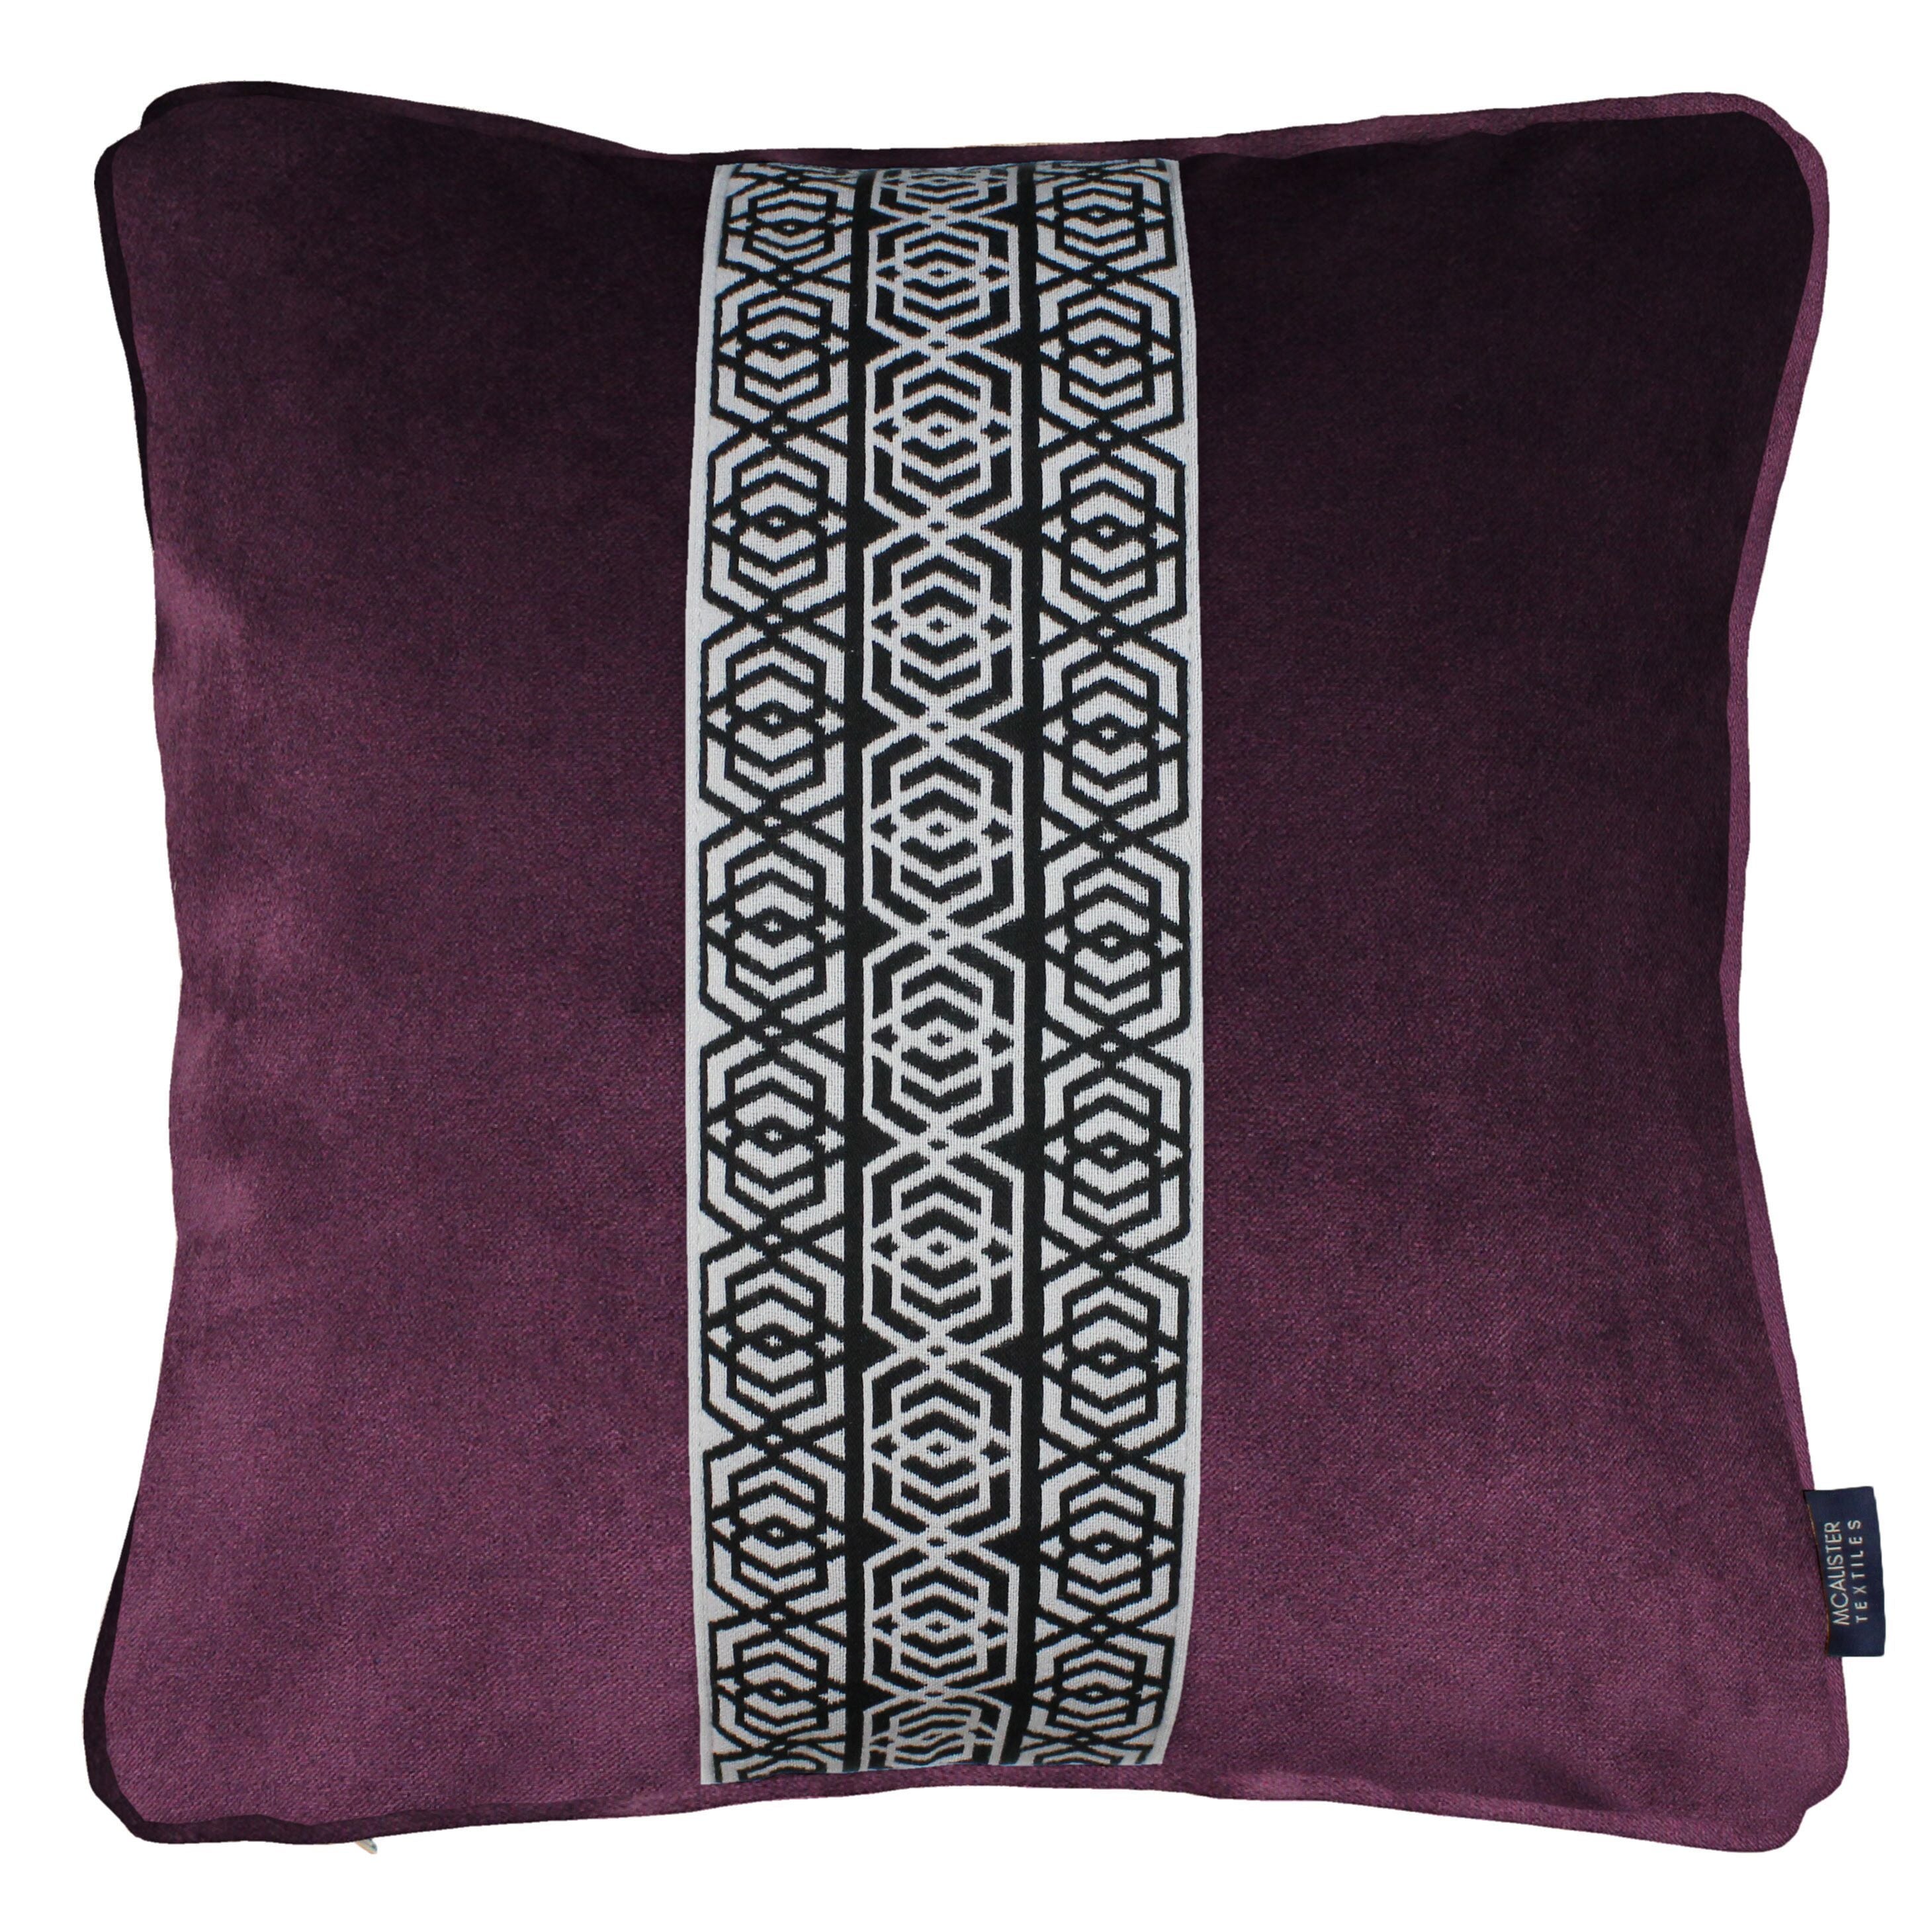 McAlister Textiles Coba Striped Aubergine Purple Velvet Cushion Cushions and Covers Polyester Filler 43cm x 43cm 